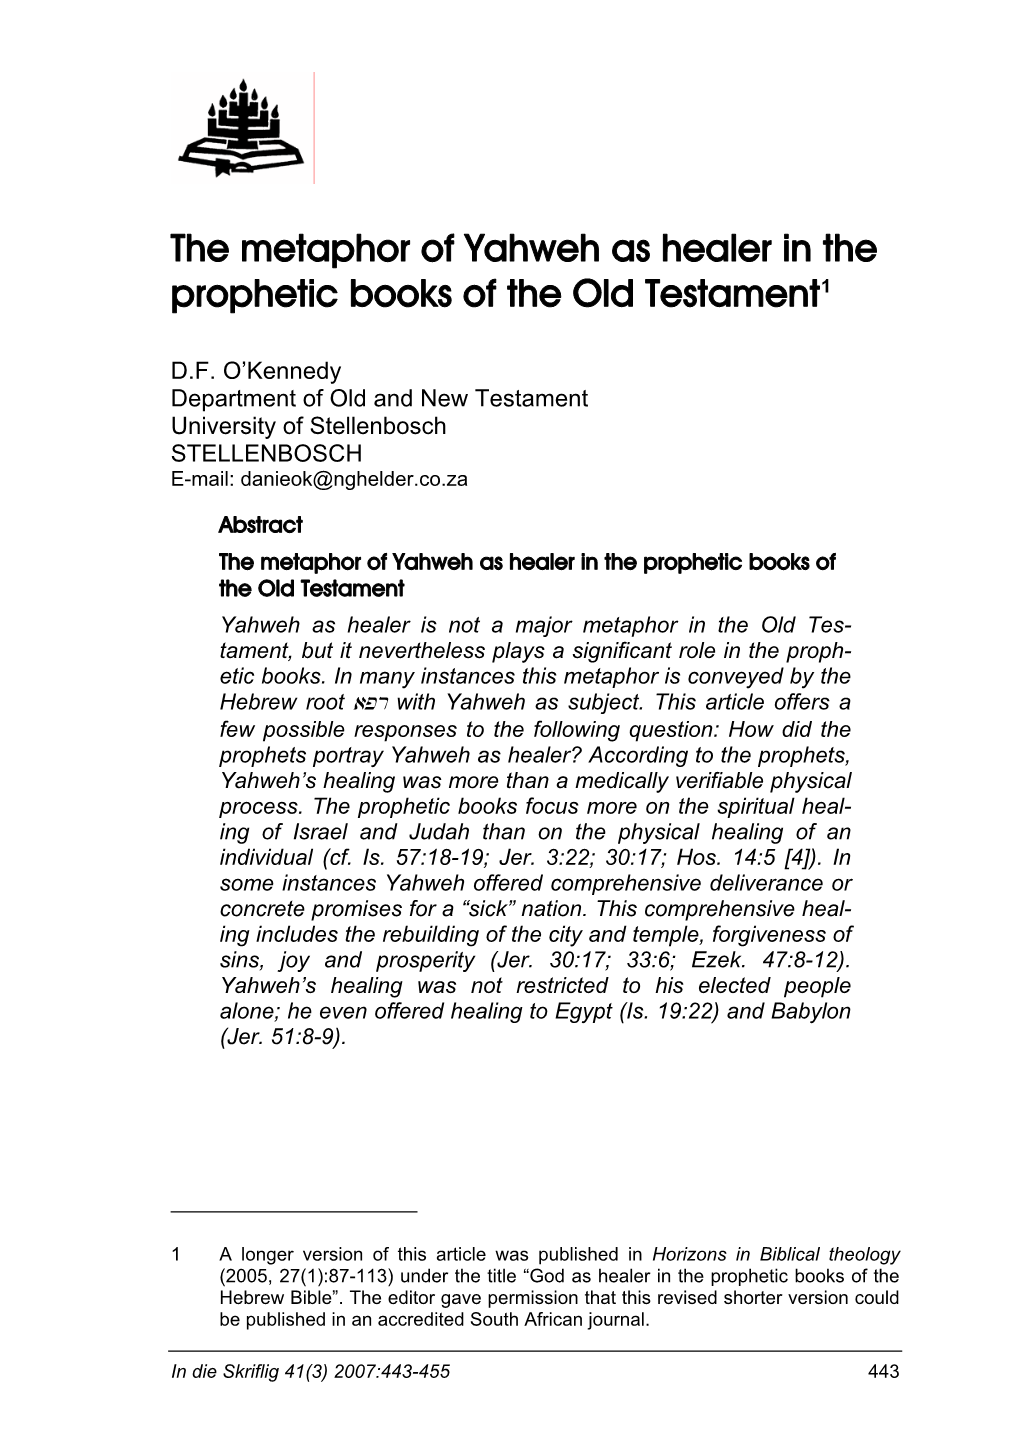 The Metaphor of Yahweh As Healer in the Prophetic Books of the Old Testament1